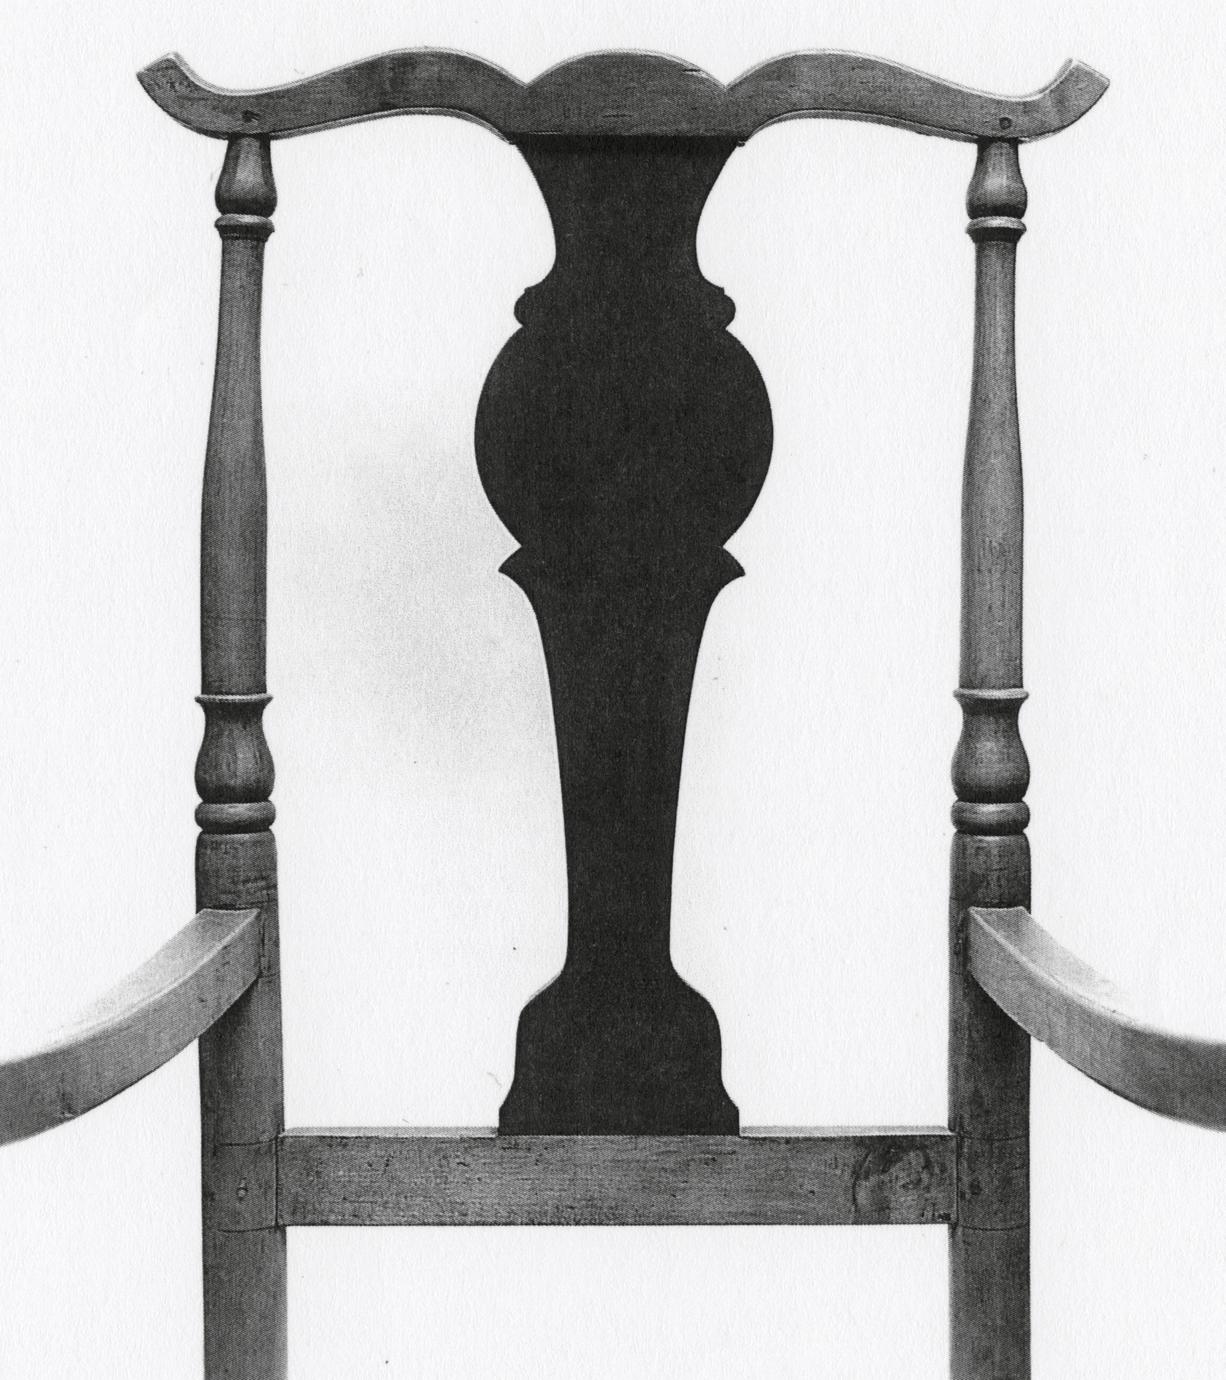 Black and white photograph of a fiddle-back armchair with rockers.